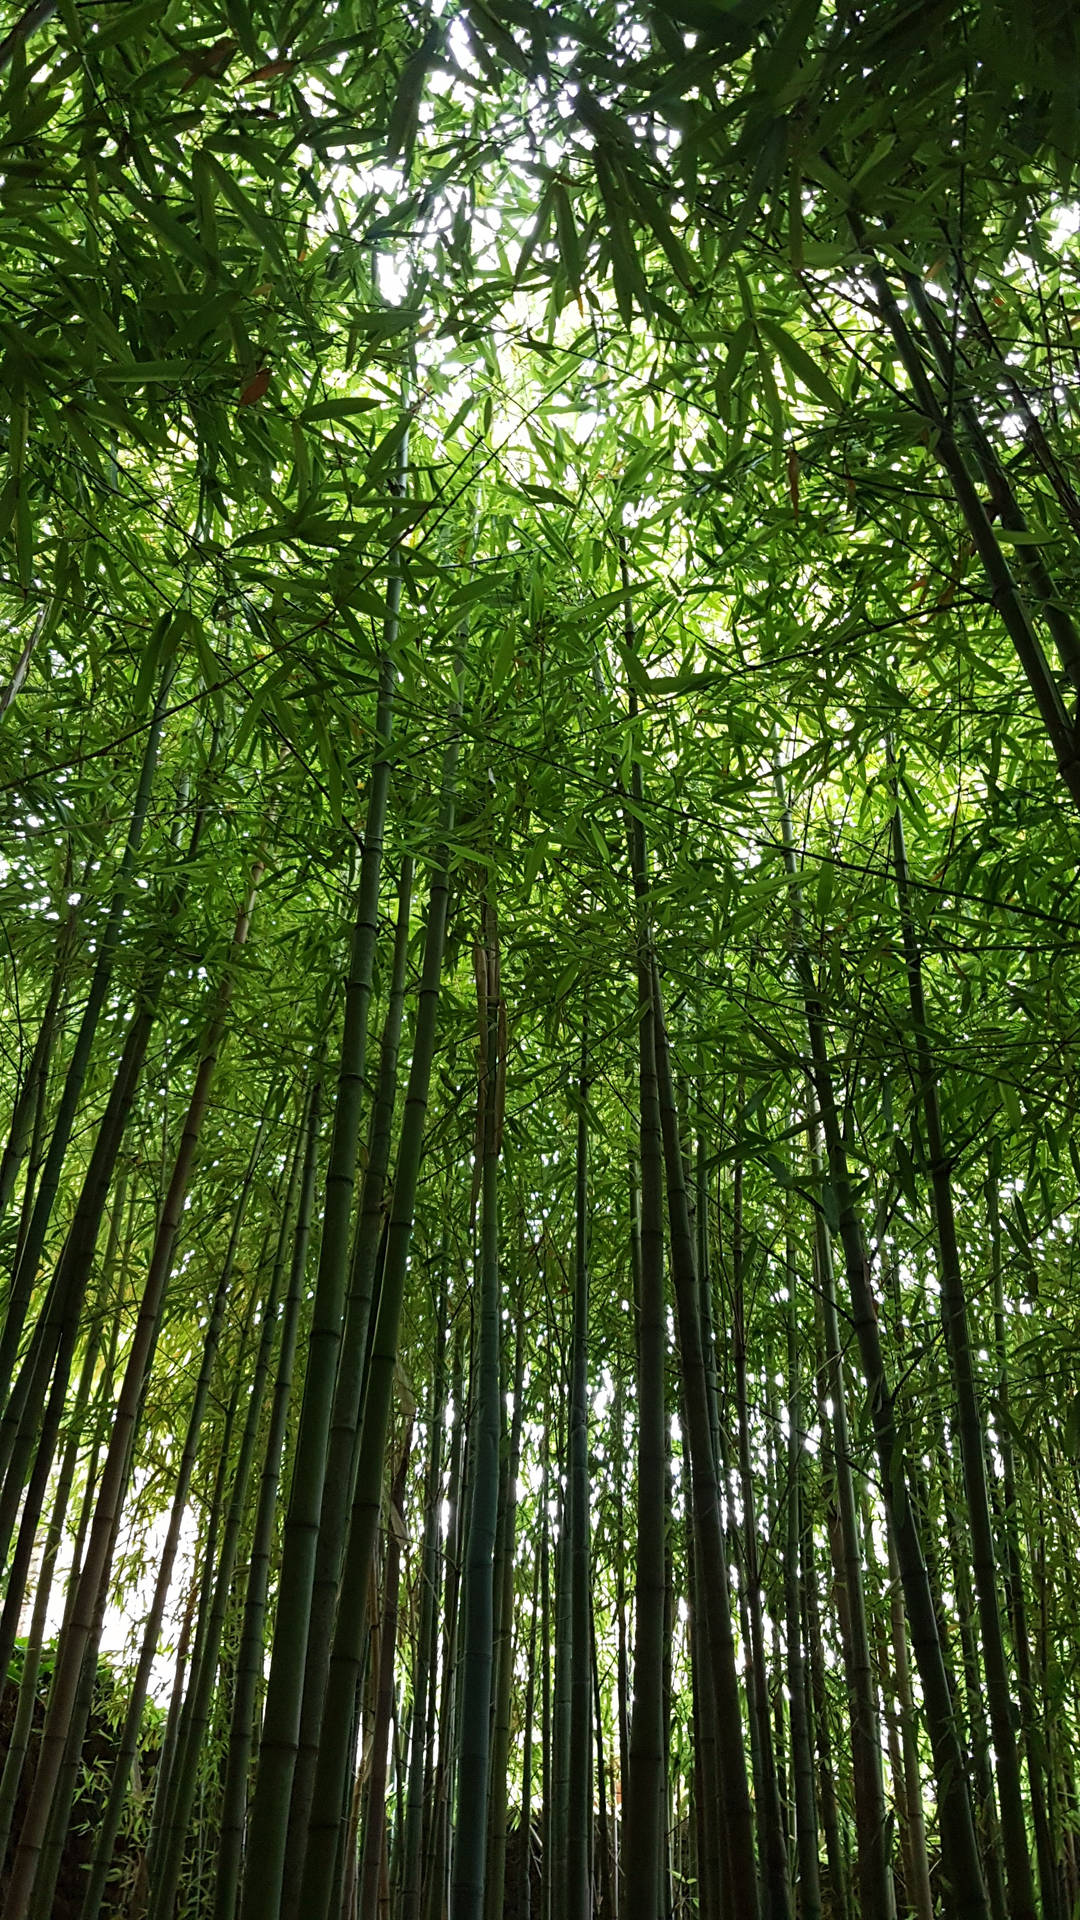 Serene Bamboo Forest Scenery For Iphone